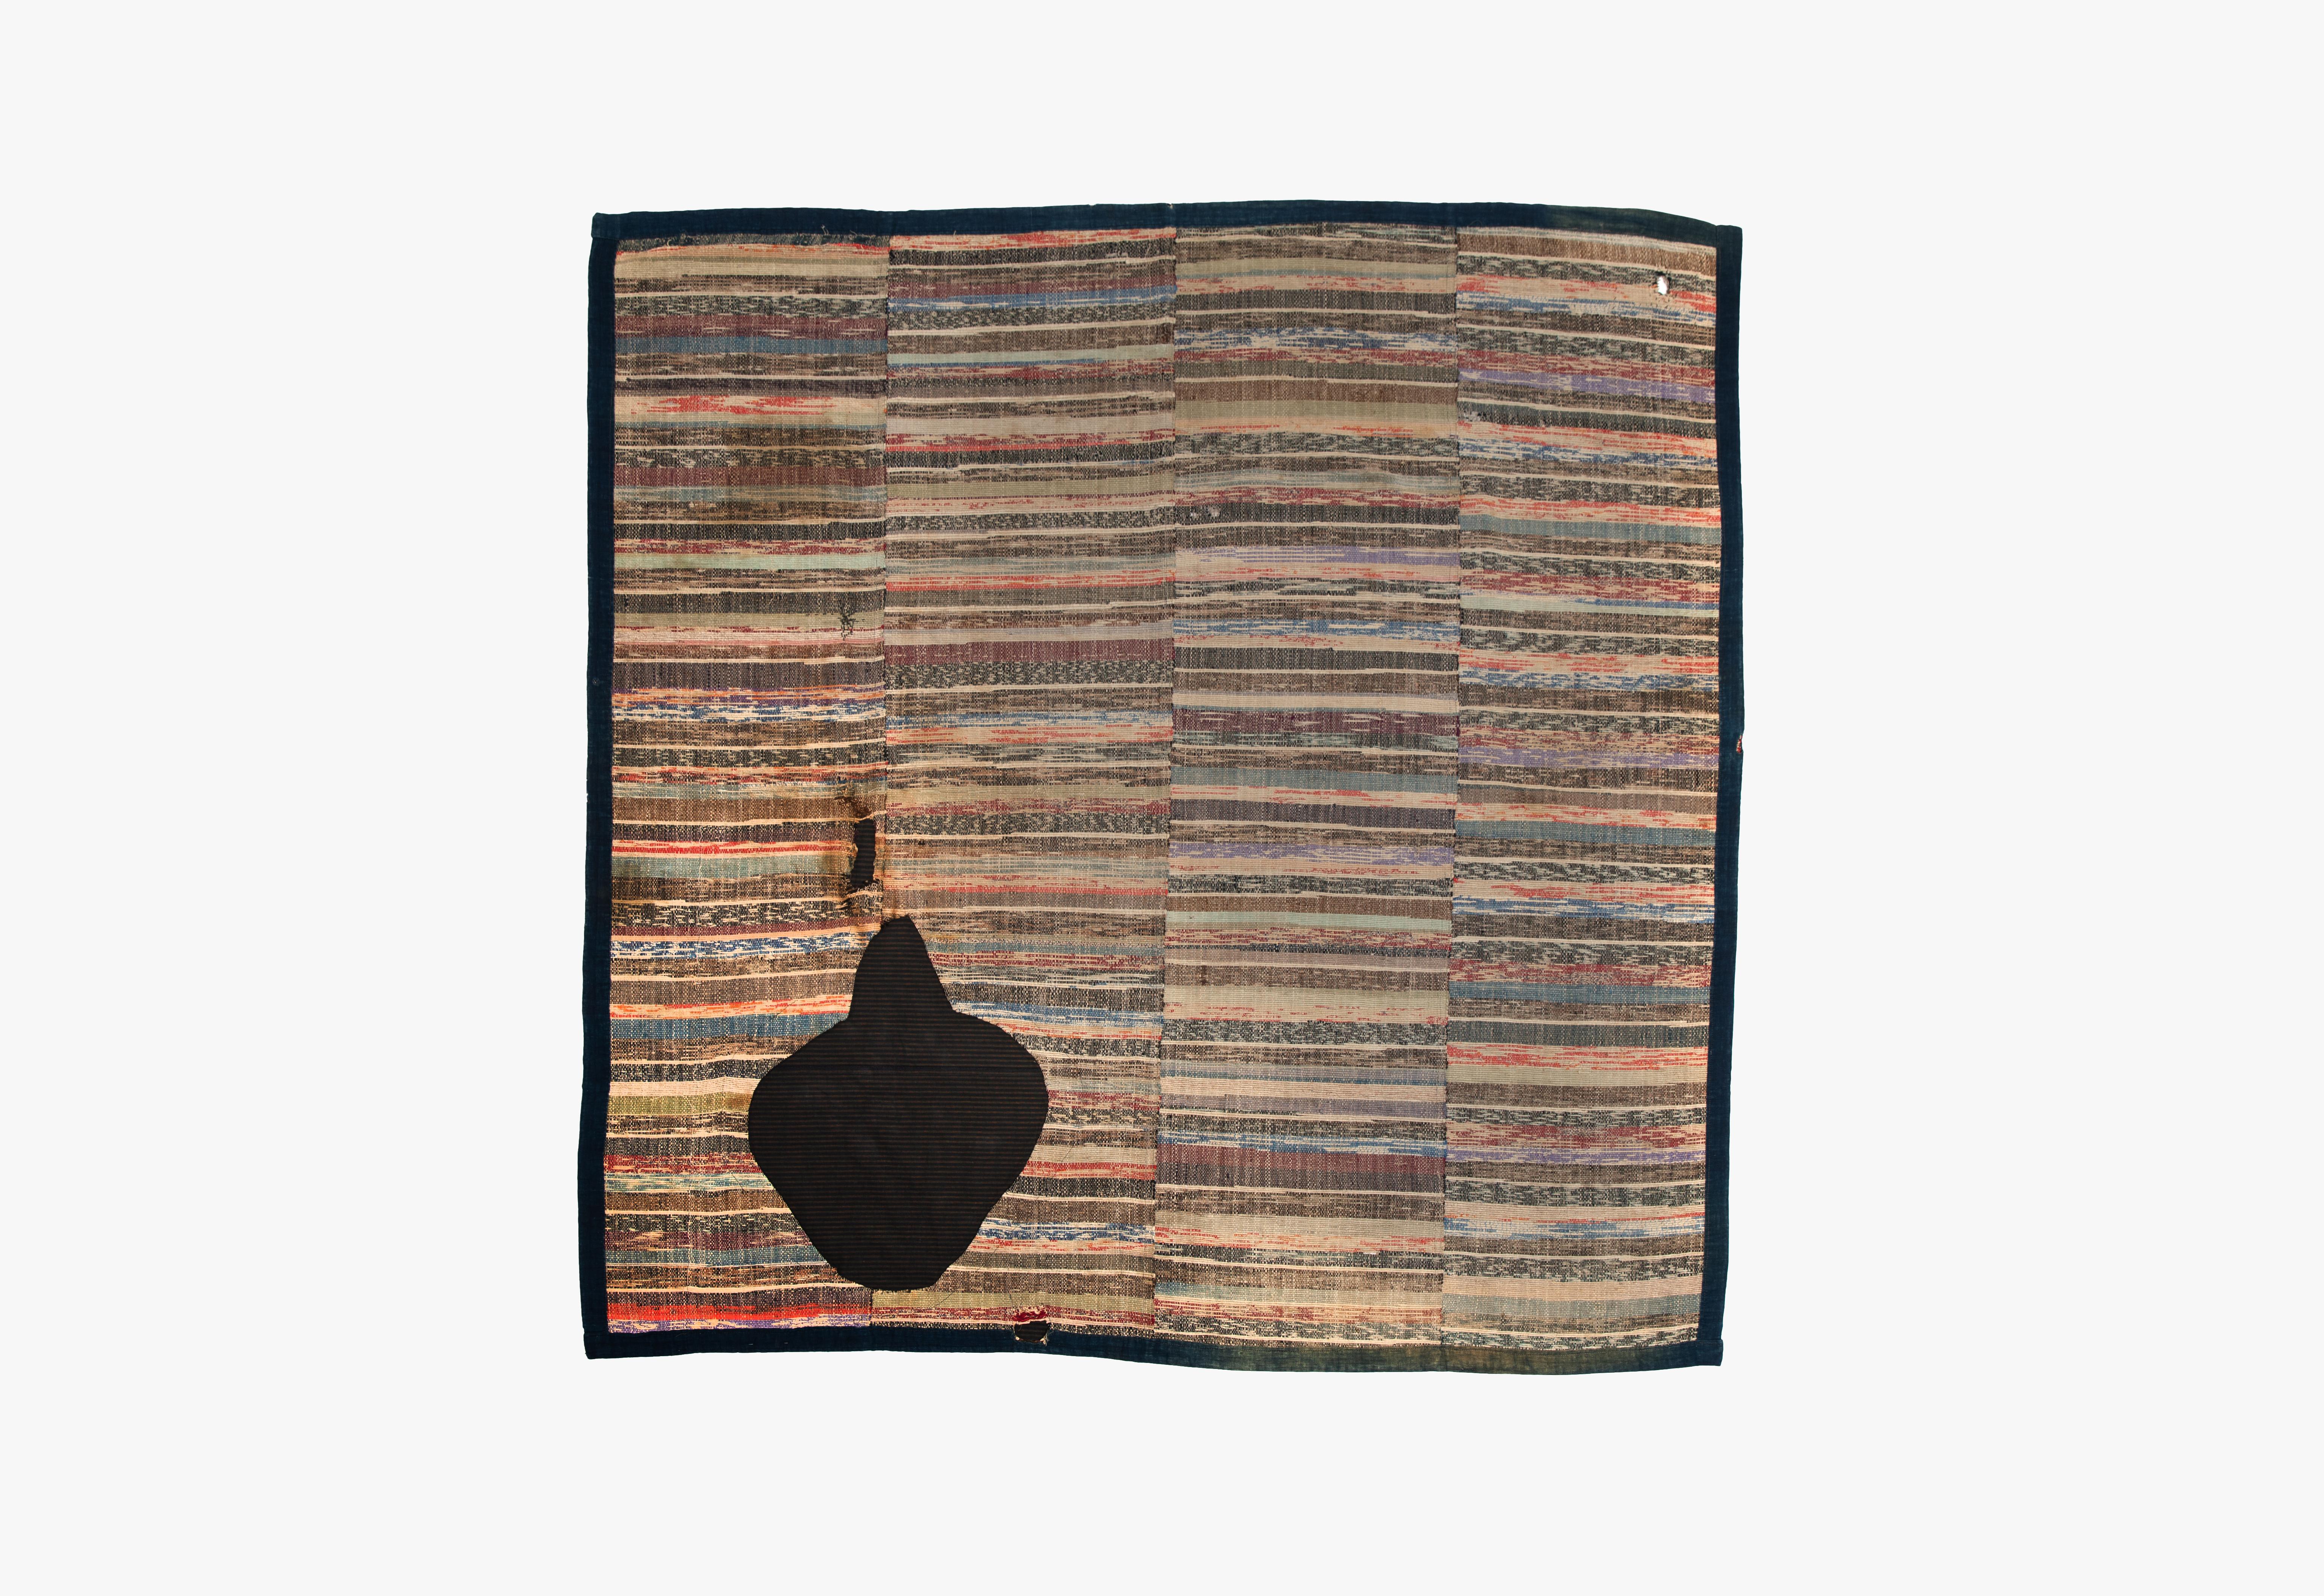 Sakiori is a traditional Japanese painstaking technique of rag weaving utilizing strips of salvages kimono, futon covers and other fabric. 
Nothing goes to waste. ]
This incredible rug is double sided for an added weight. An absolutely stunning